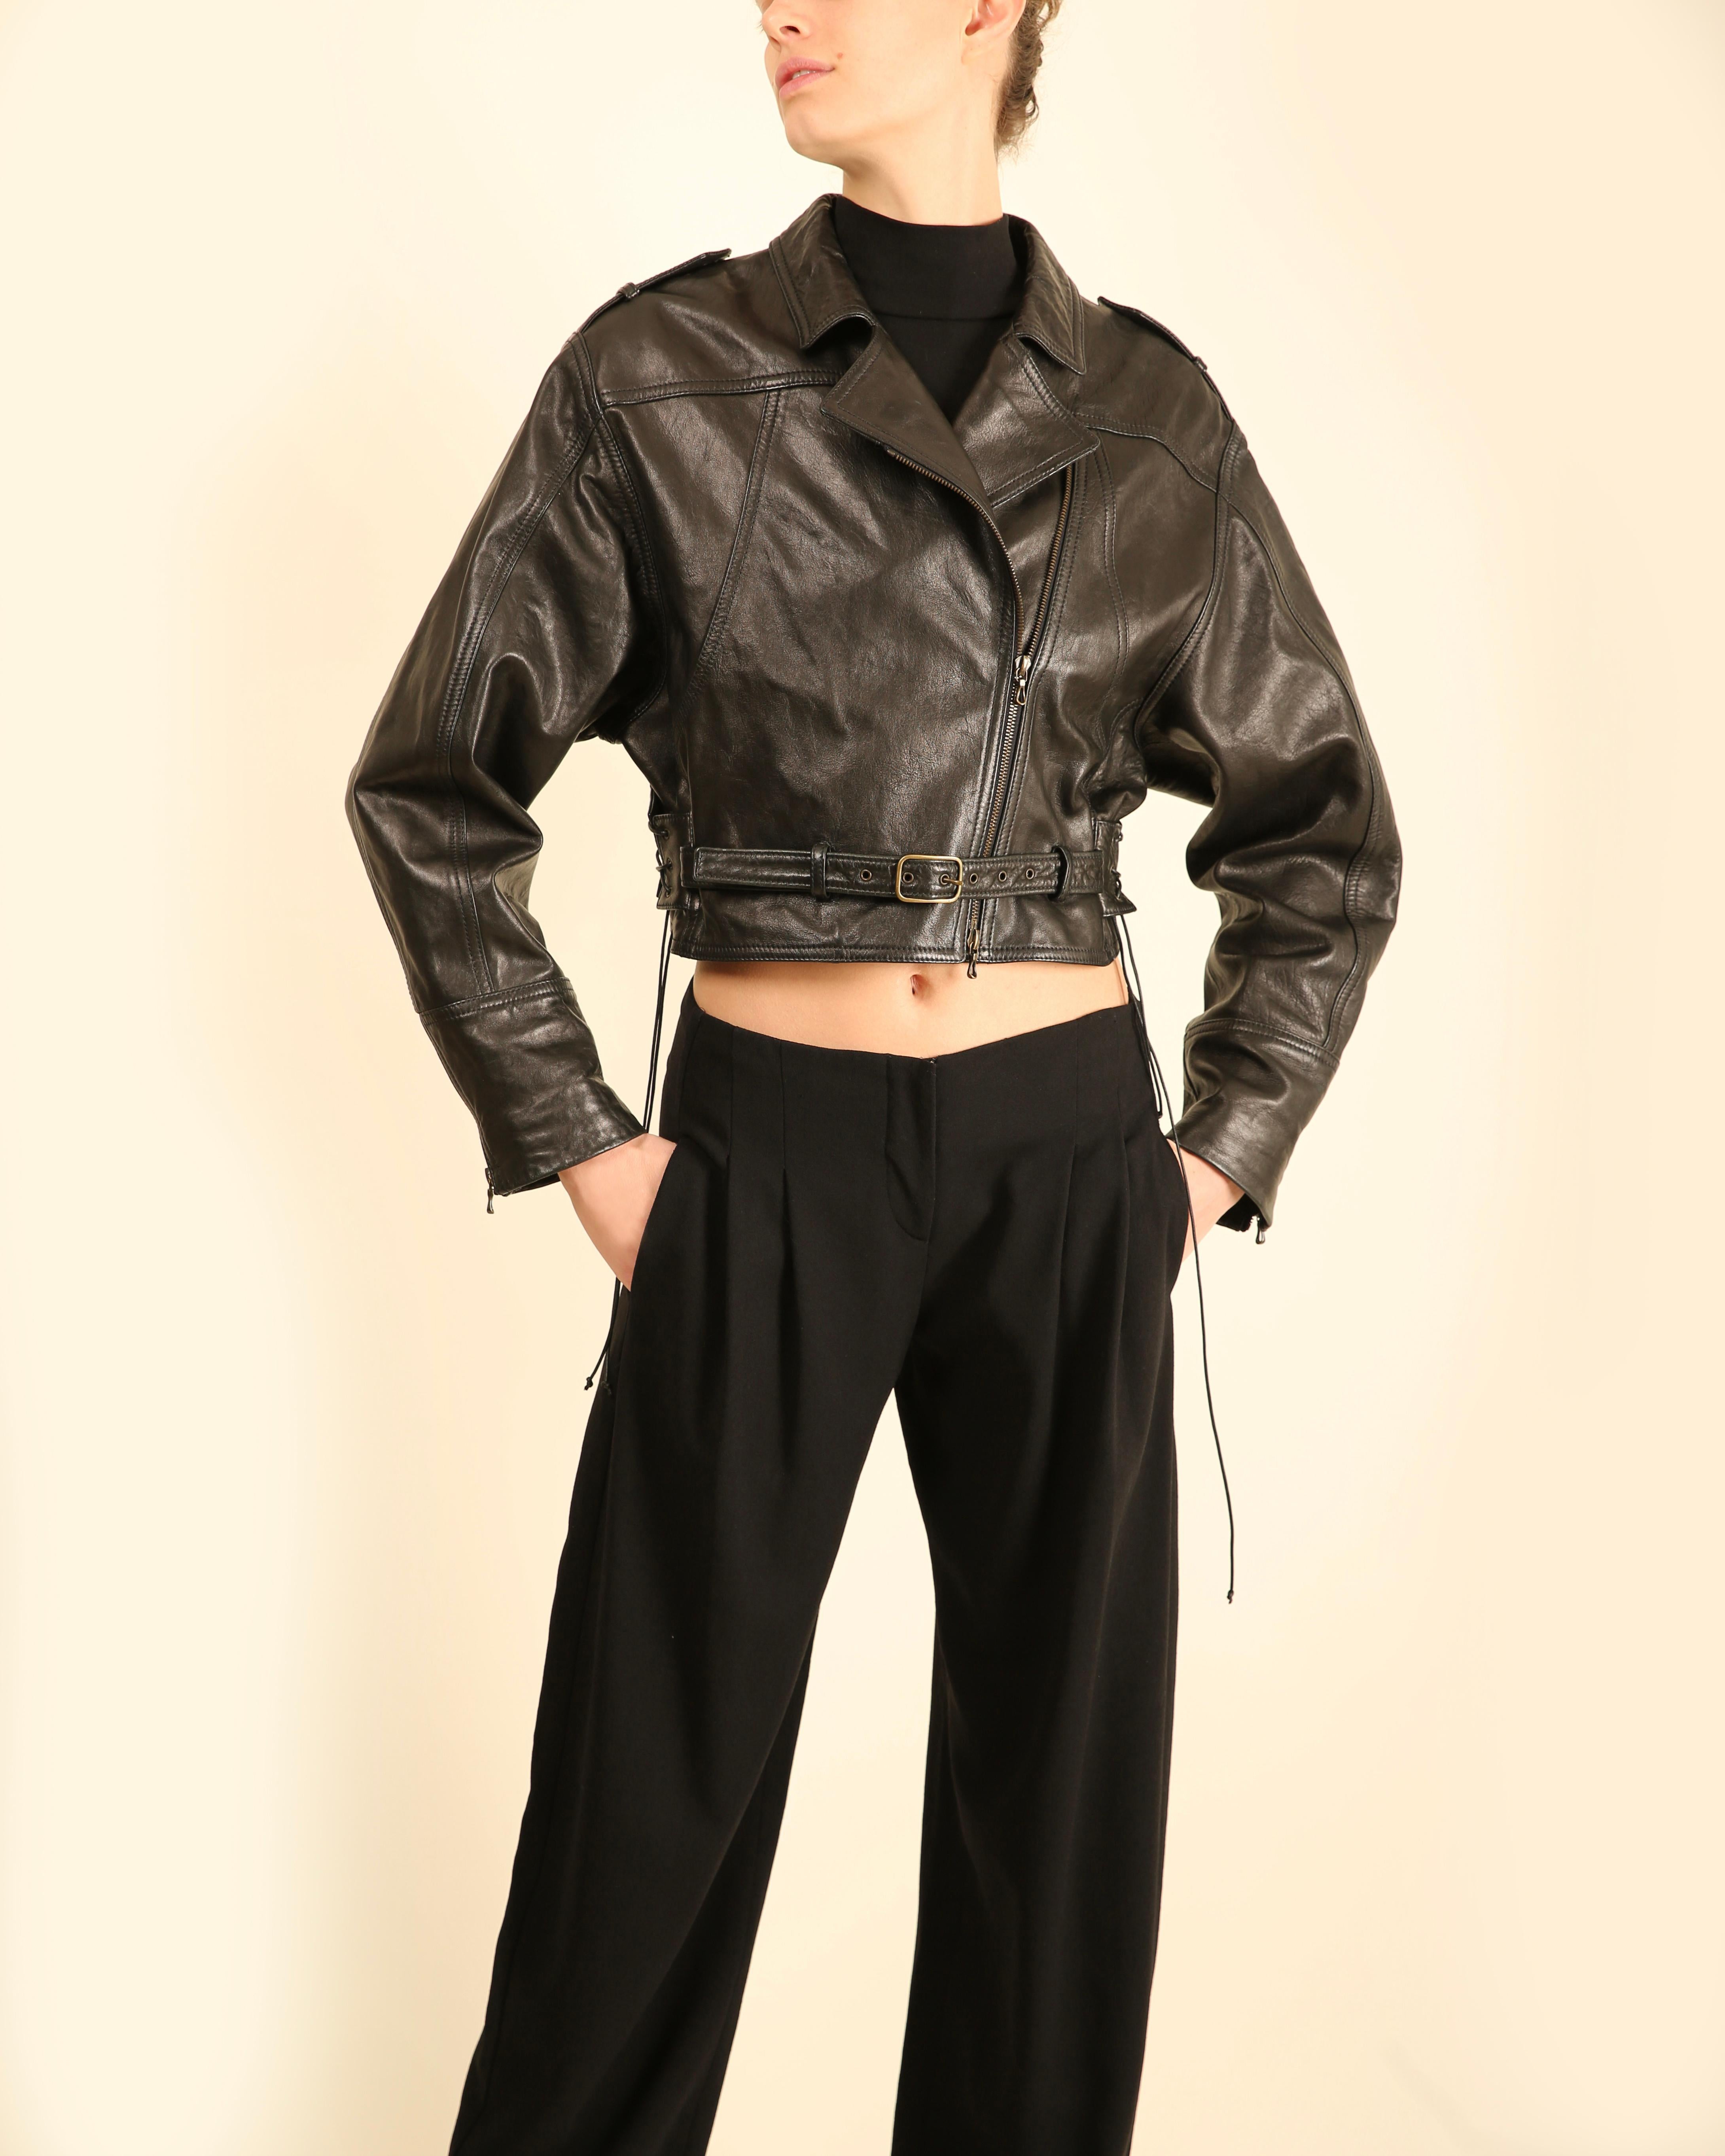 LOVE LALI VINTAGE

Lanvin Hiver 2016 black leather jacket
This is a fantastic jacket that has a wonderful vintage vibe to it, a slightly oversized fit, soft leather, and dropped shoulders
Off centre diagonal zip closure with a belt at the waist.